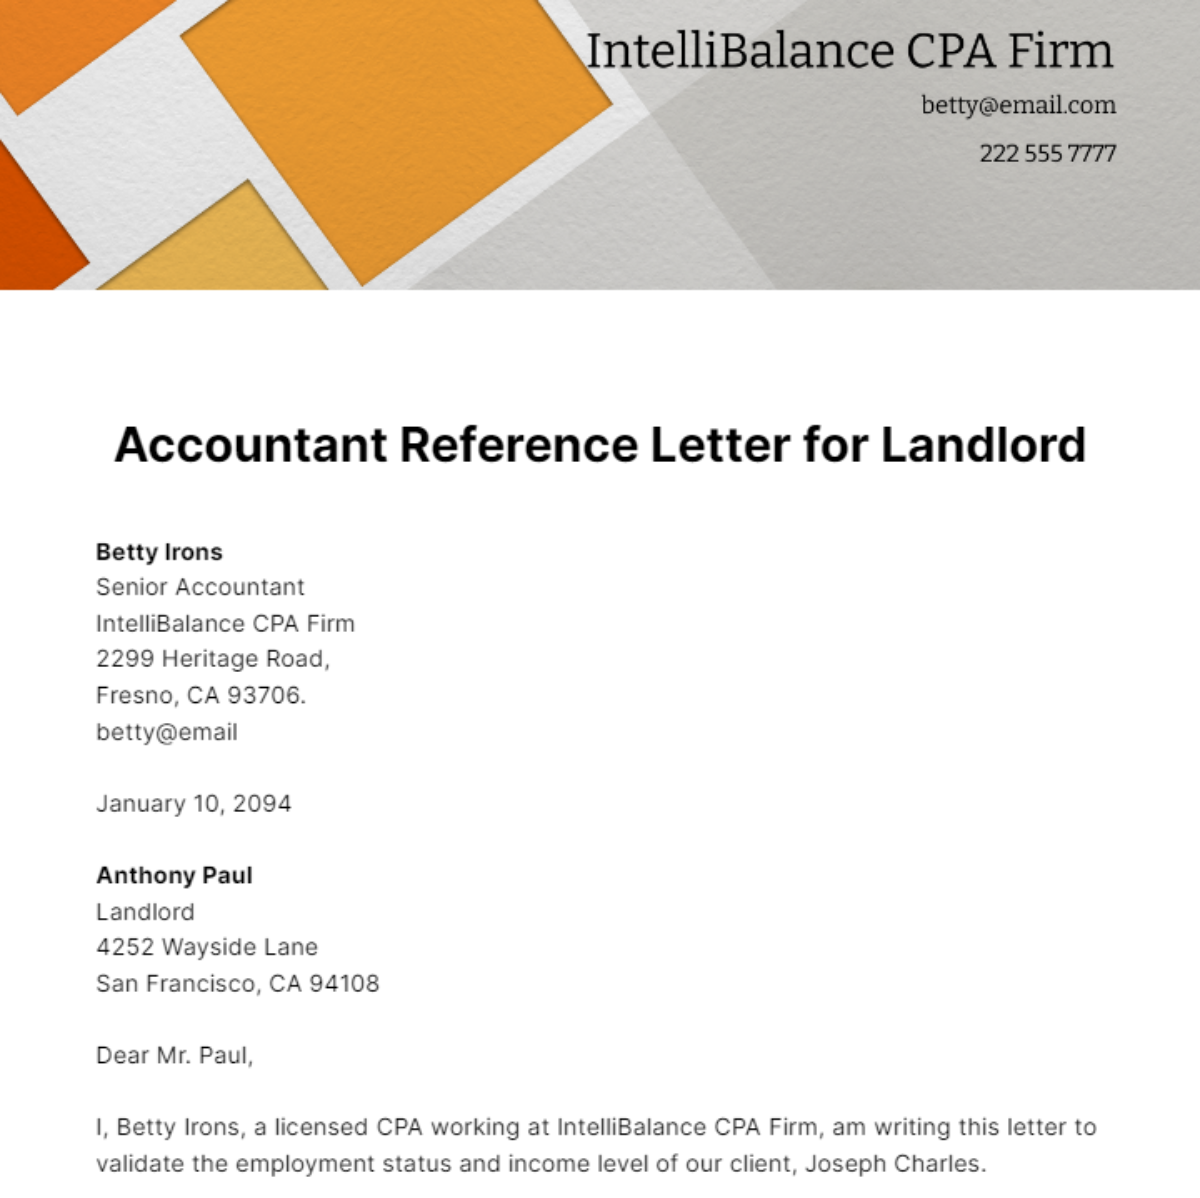 Accountant Reference Letter for Landlord Template